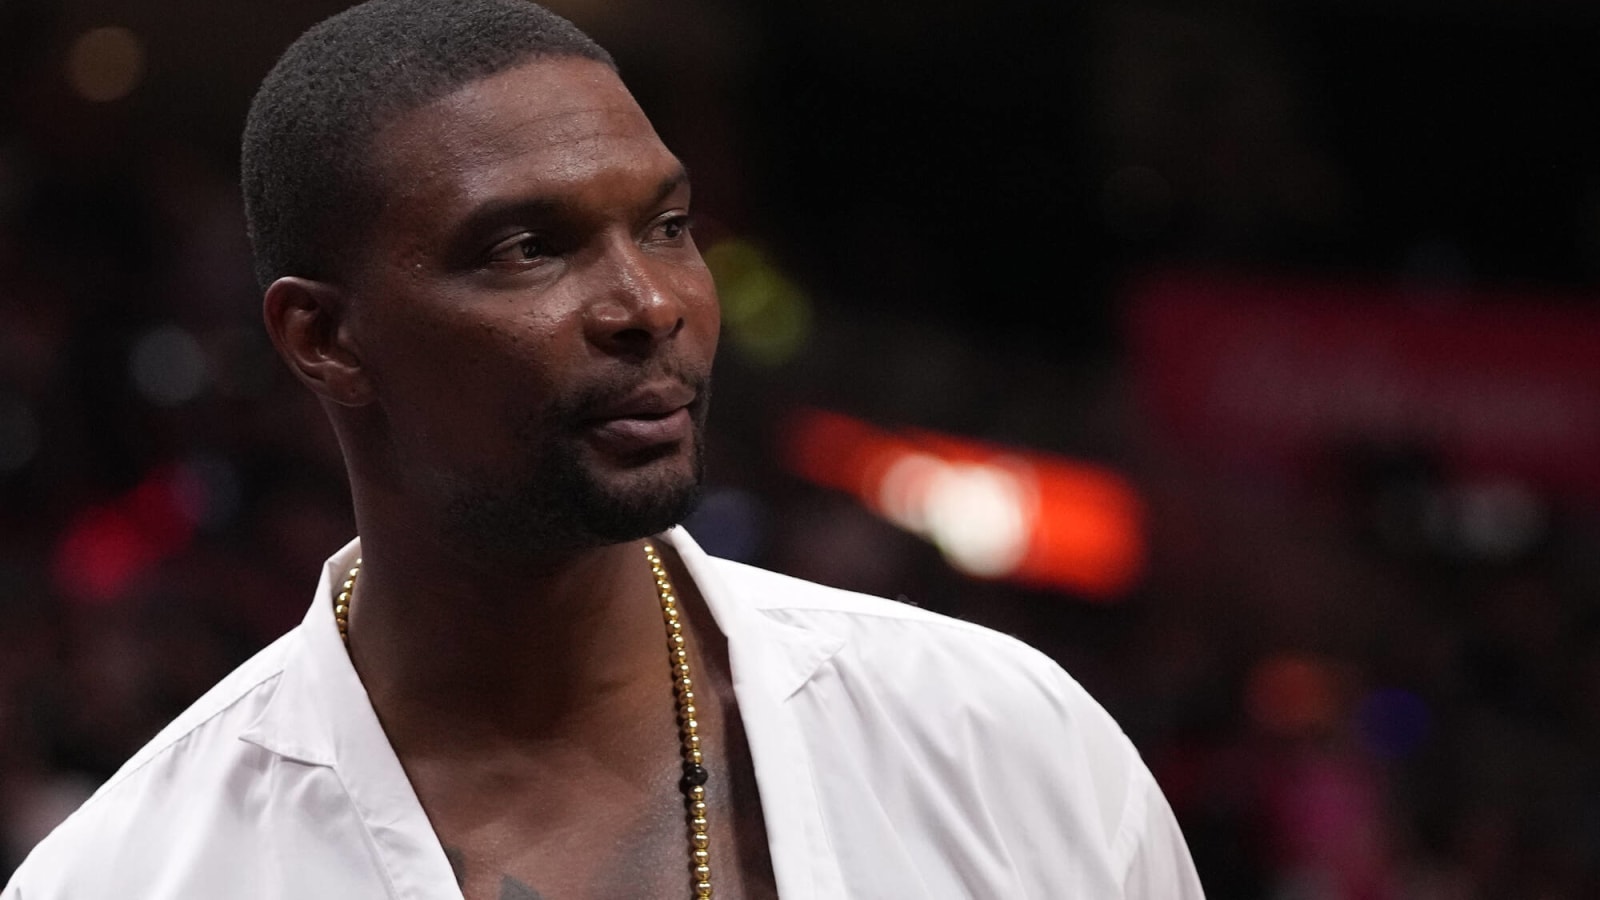 Chris Bosh Got 120 Monthly Payments Of $868,786 After He Reached An Agreement With The Miami Heat About His $52.1 Million Payout